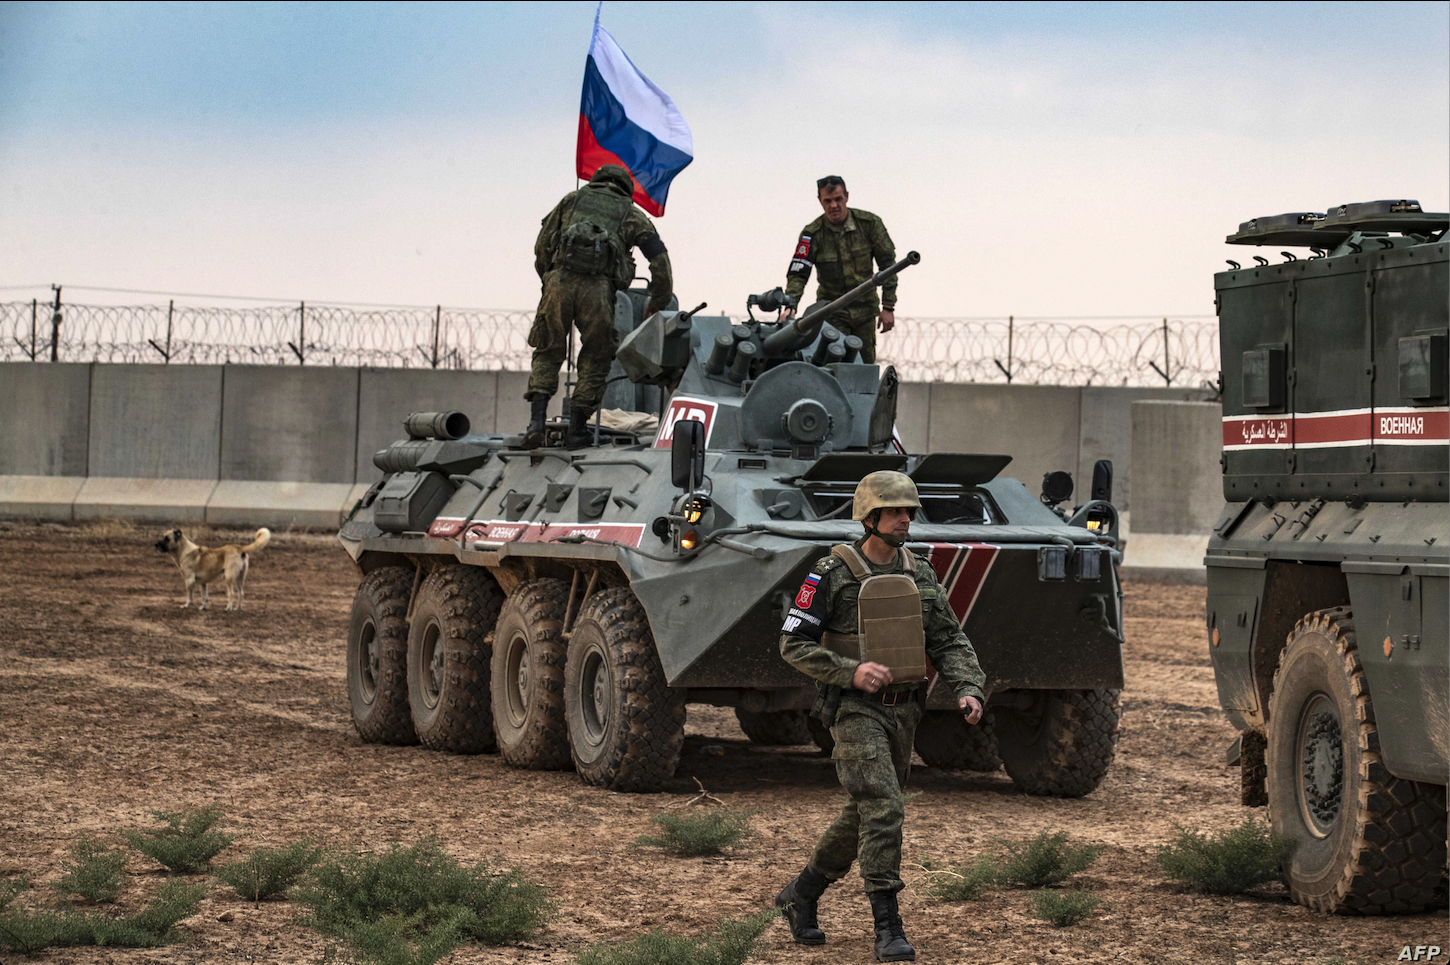 Russian troops with military vehicles are seen on patrol outside the town of Darbasiyah in Syria's northeastern Hasakeh province, on the border with Turkey, Novemer 1, 2019